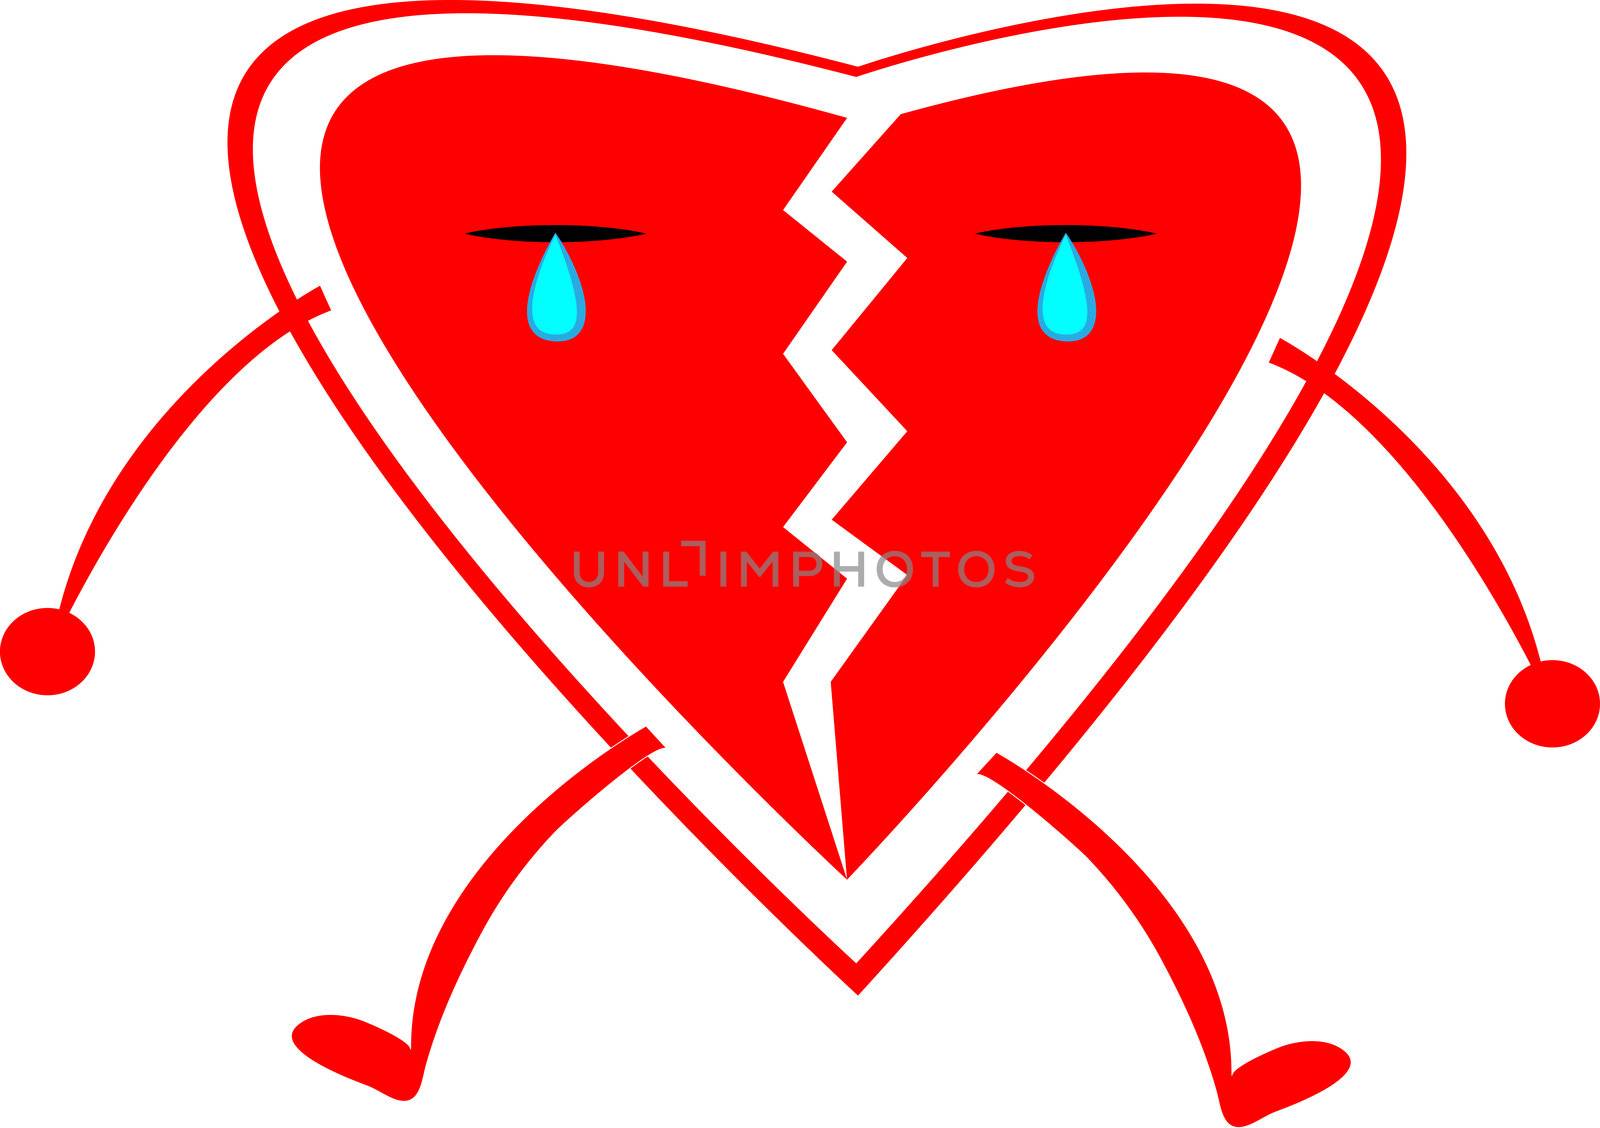 A Broken Heart on a white background